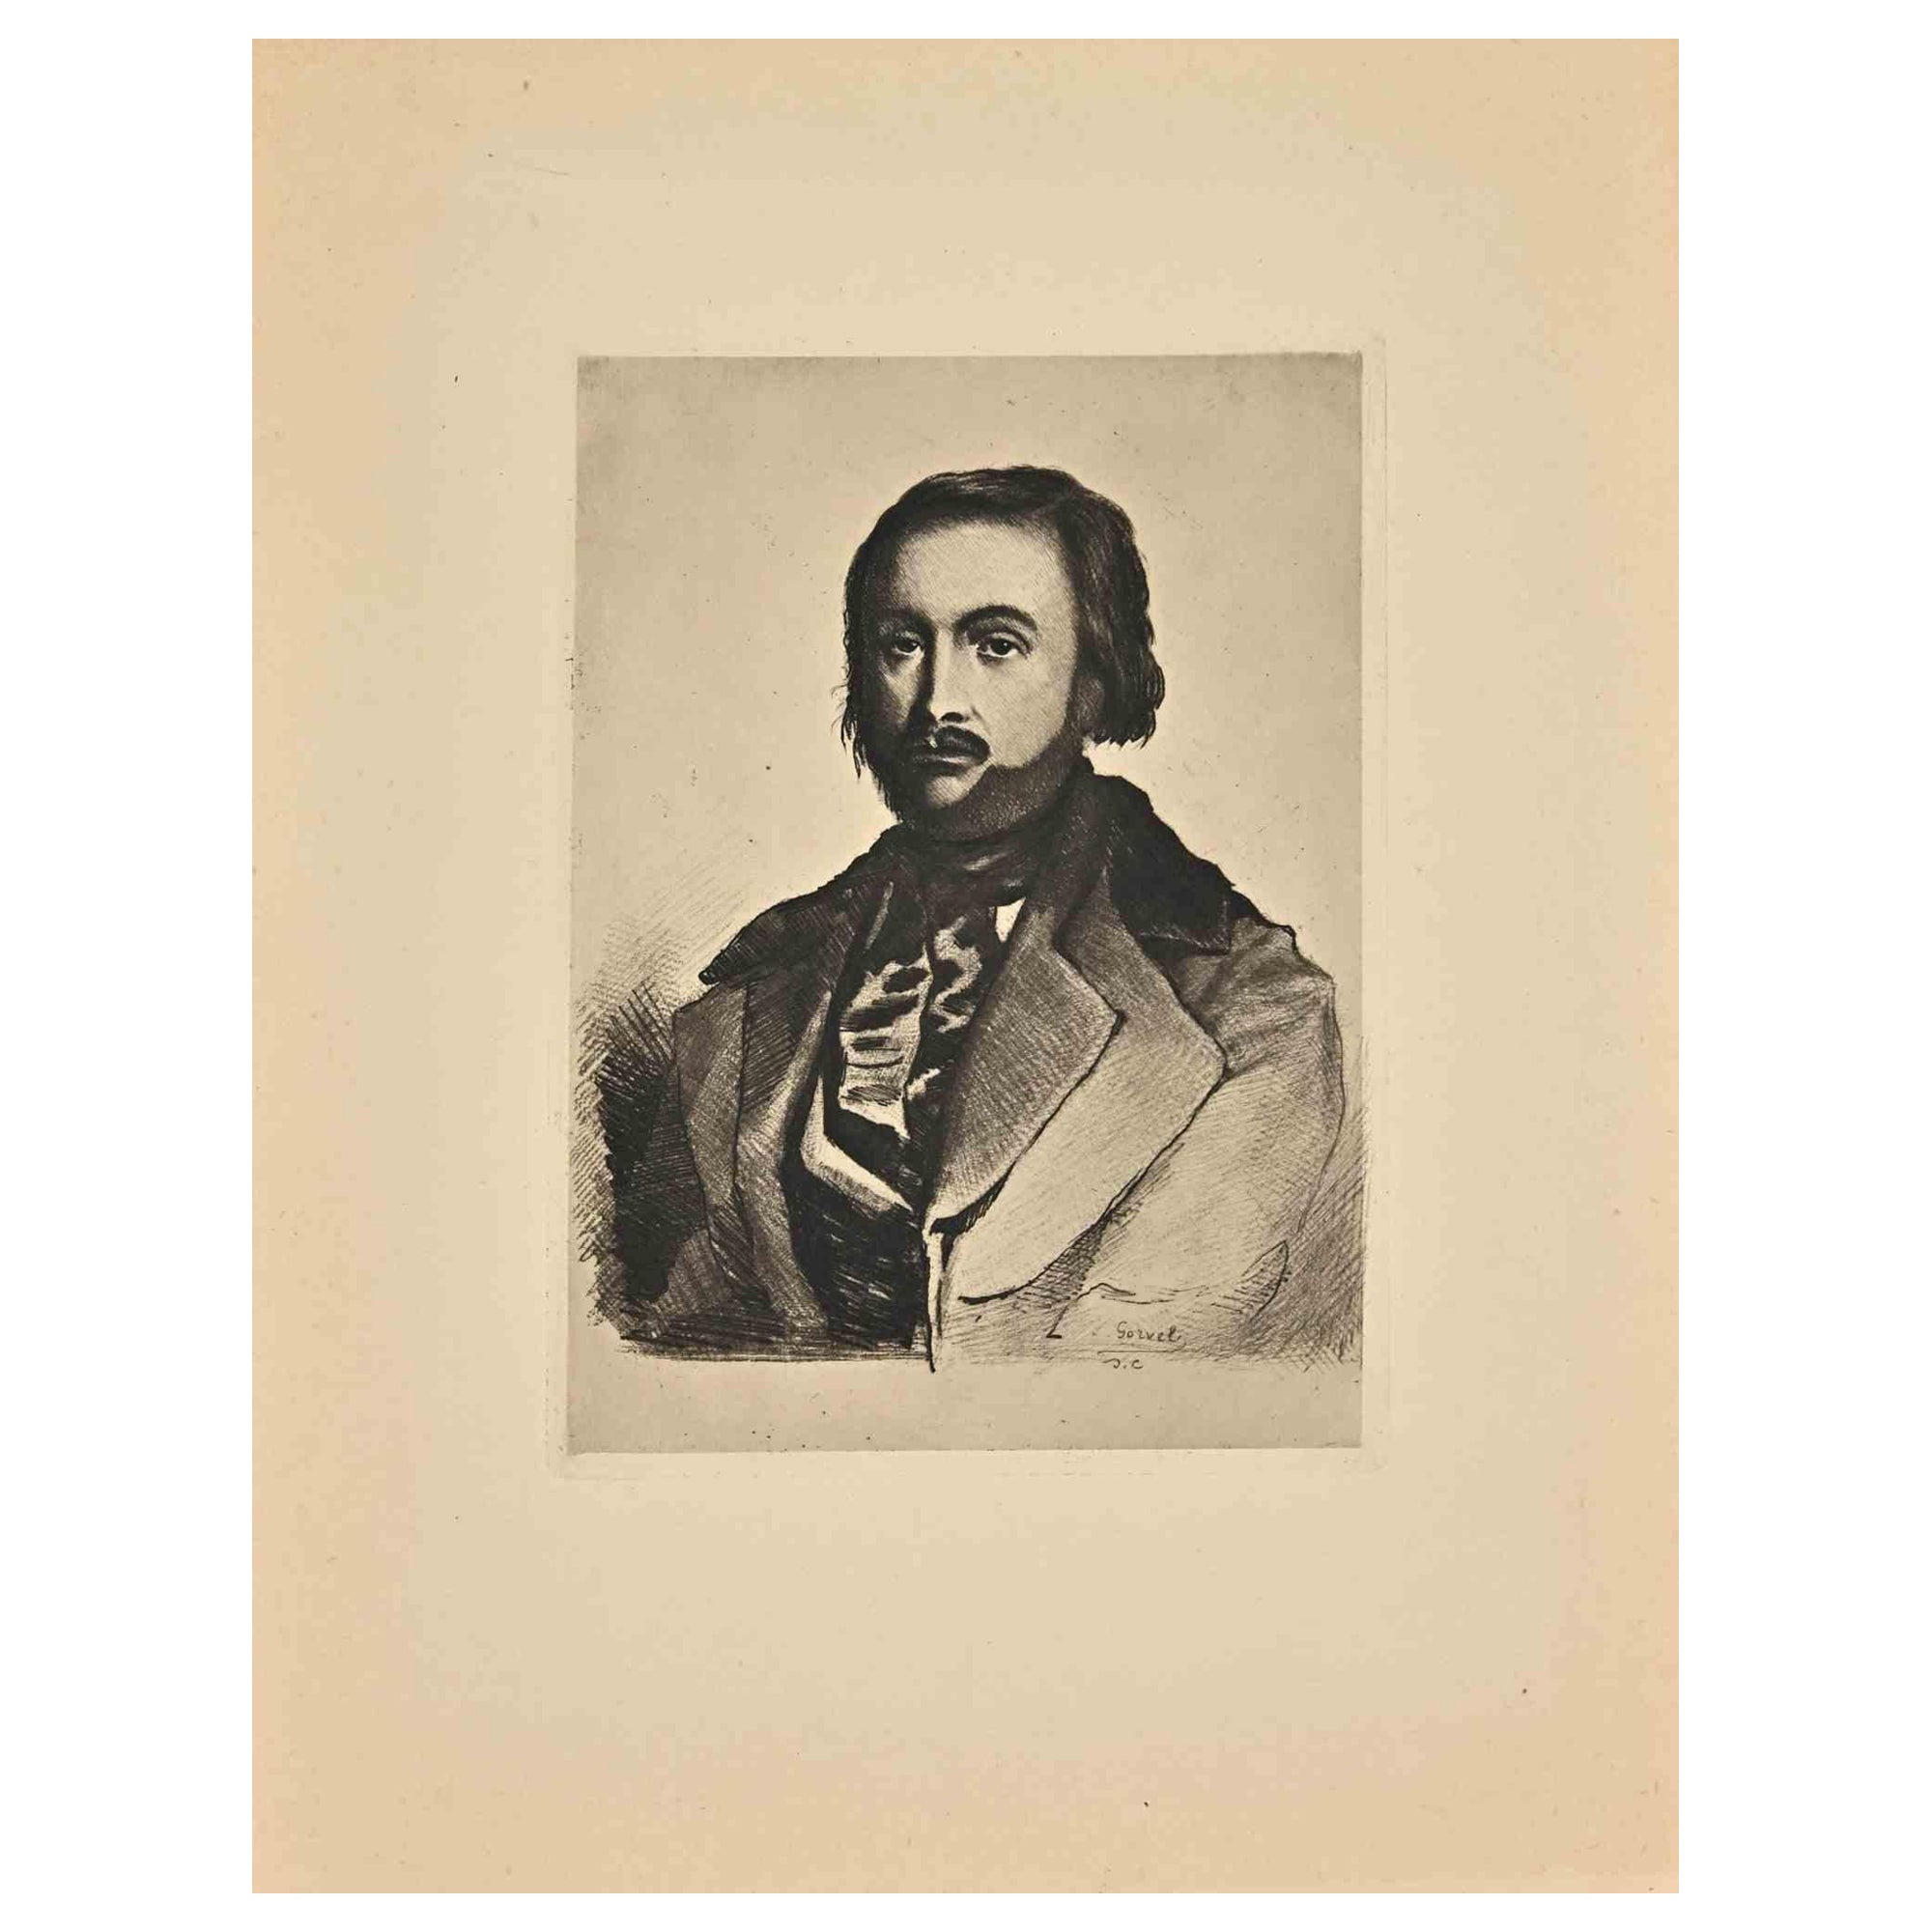 Portrait is an original modern artwork realized by George Gorvel in the 19th Century.

Black and white etching.

The artwork is depicted through soft strokes in a well-balanced composition.